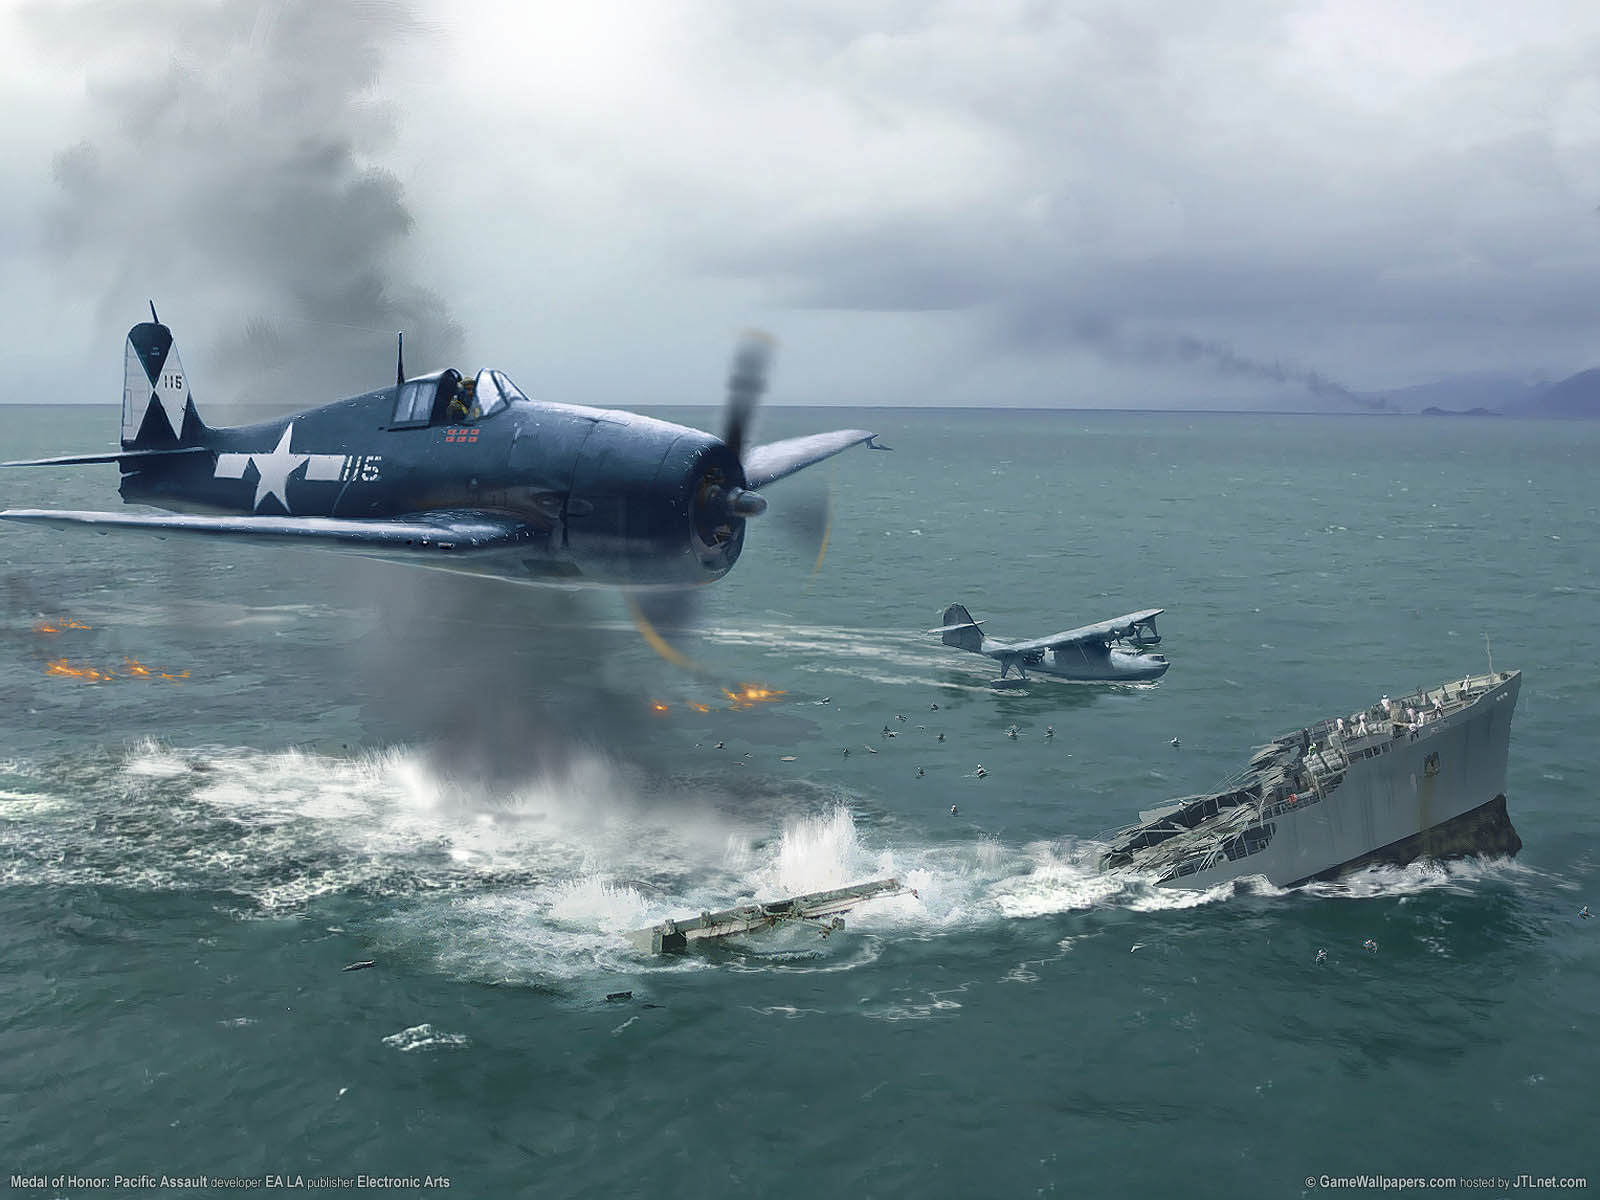 Medal of Honor%253A Pacific Assault wallpaper 04 1600x1200